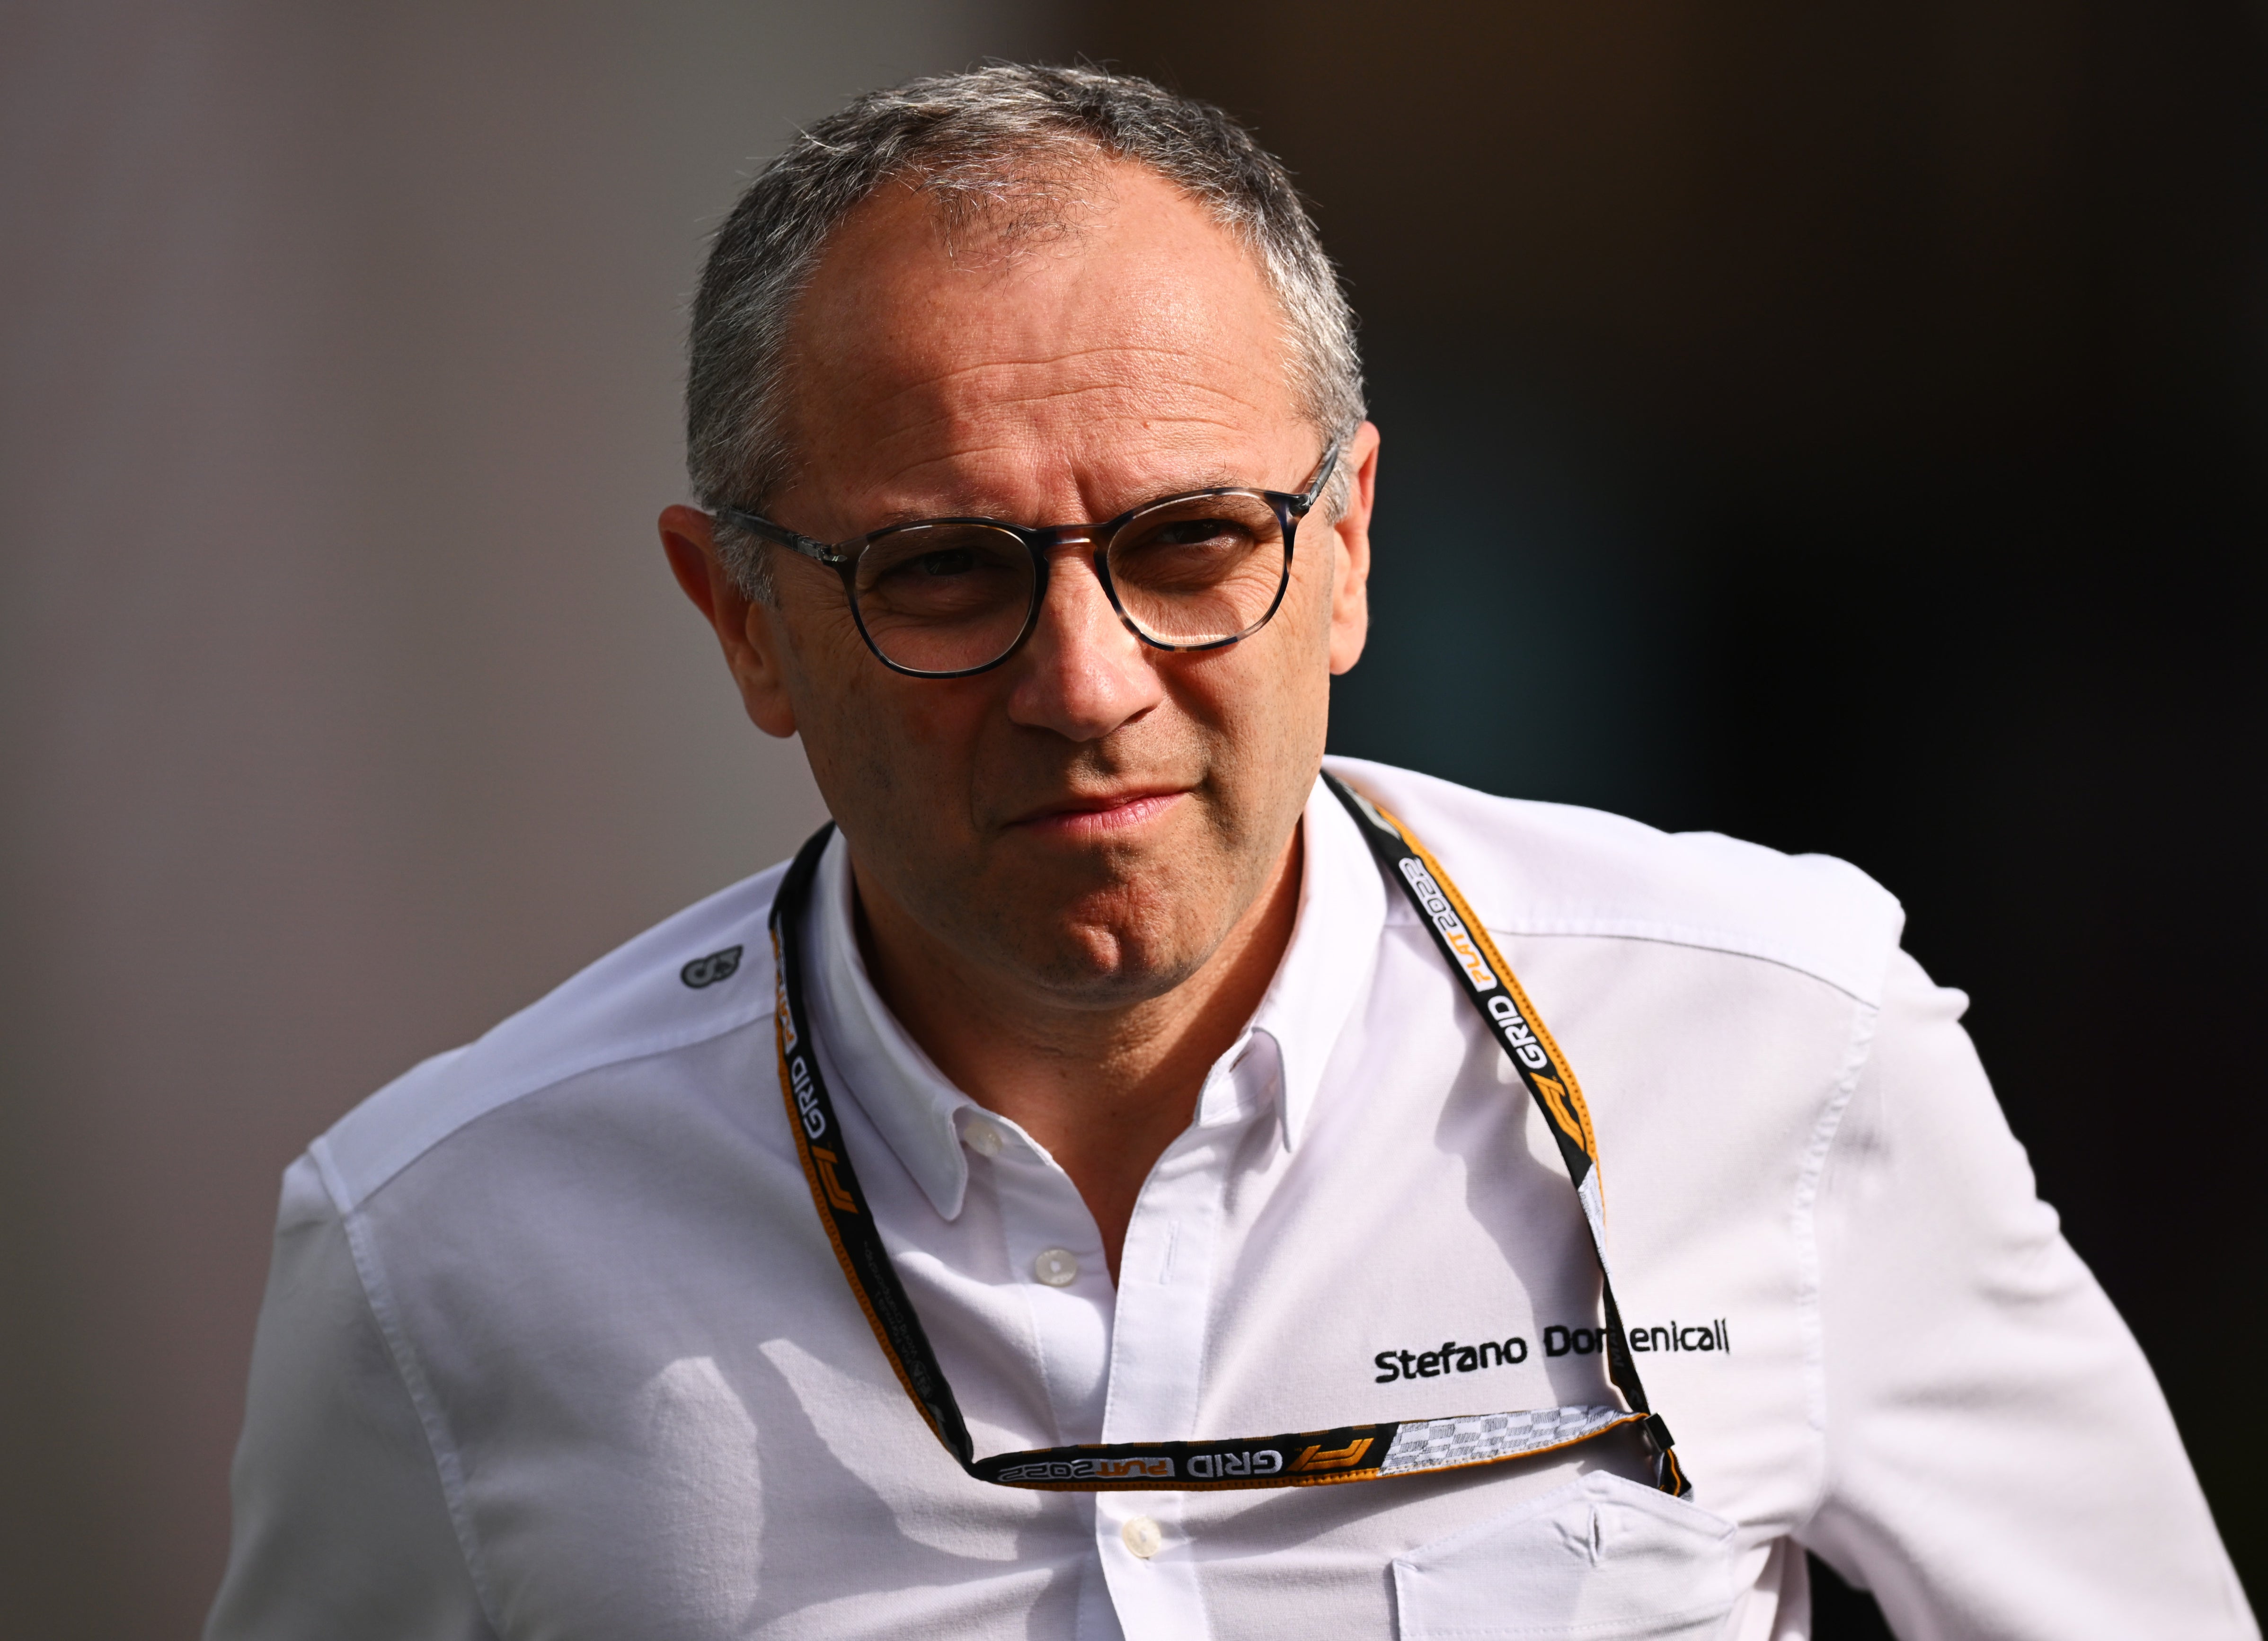 F1 boss Stefano Domenicali has implored that the sport will “never put a gag on anyone”